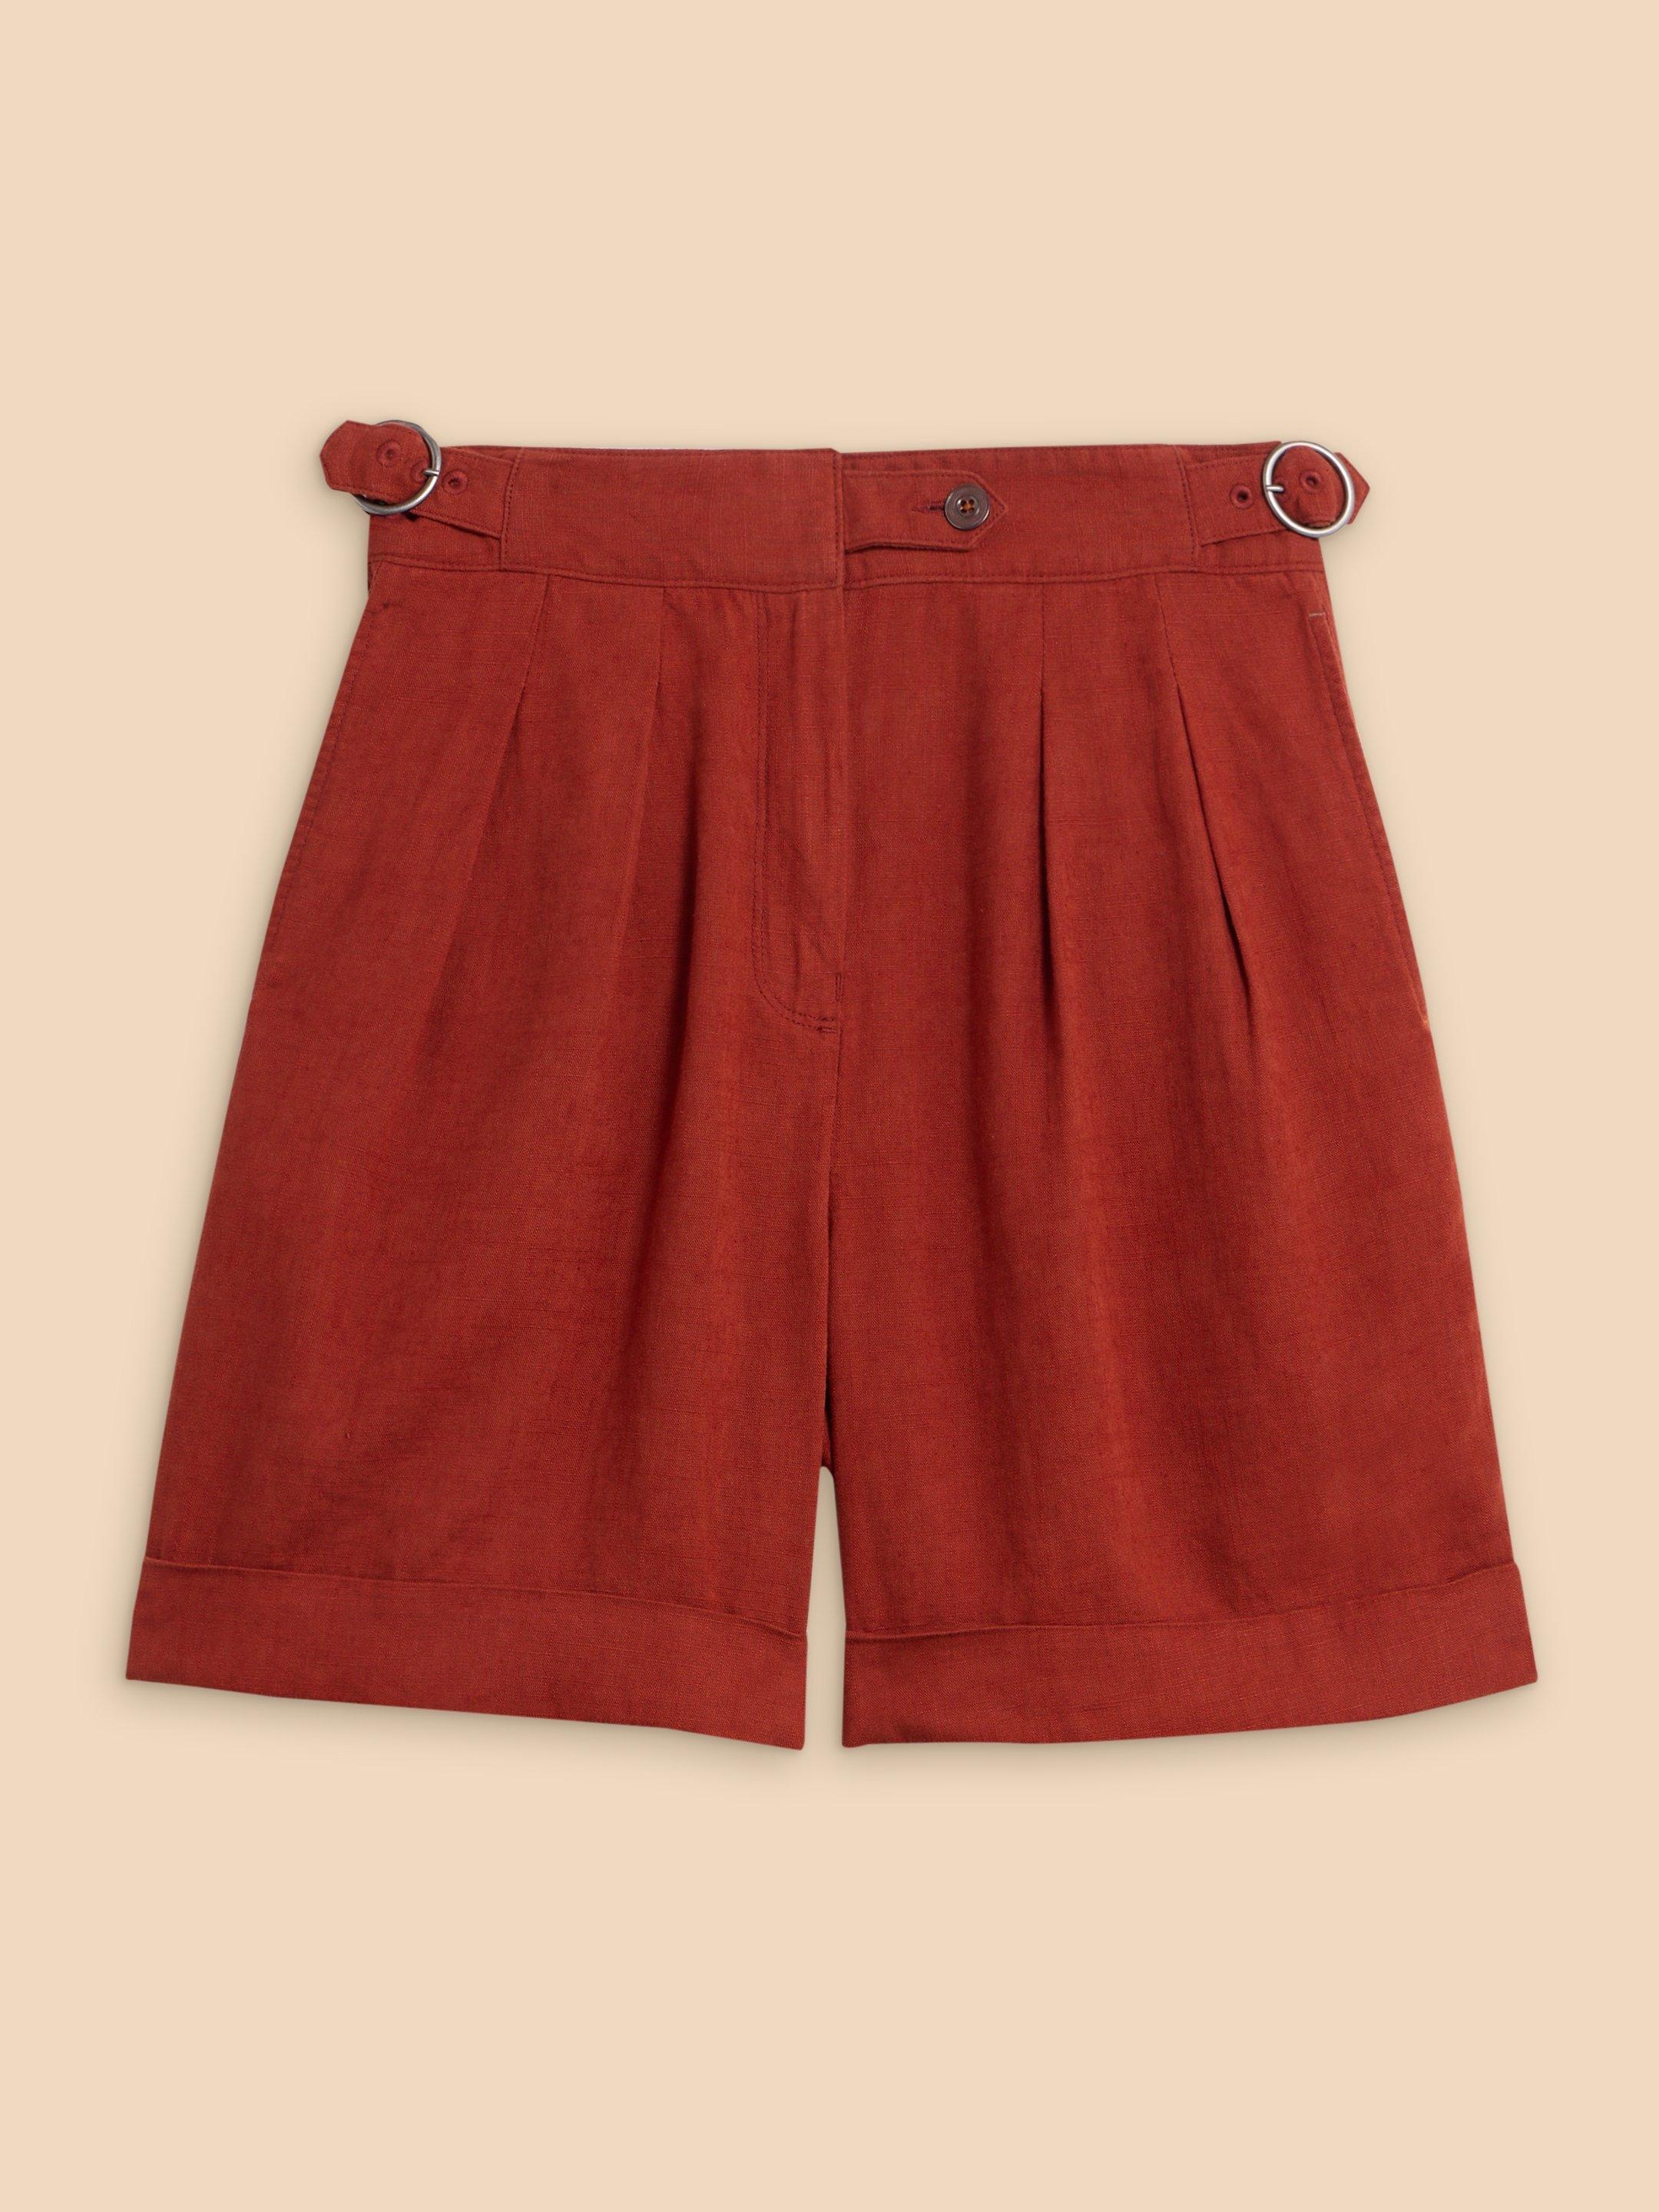 Una Shorts in DK RED - FLAT FRONT